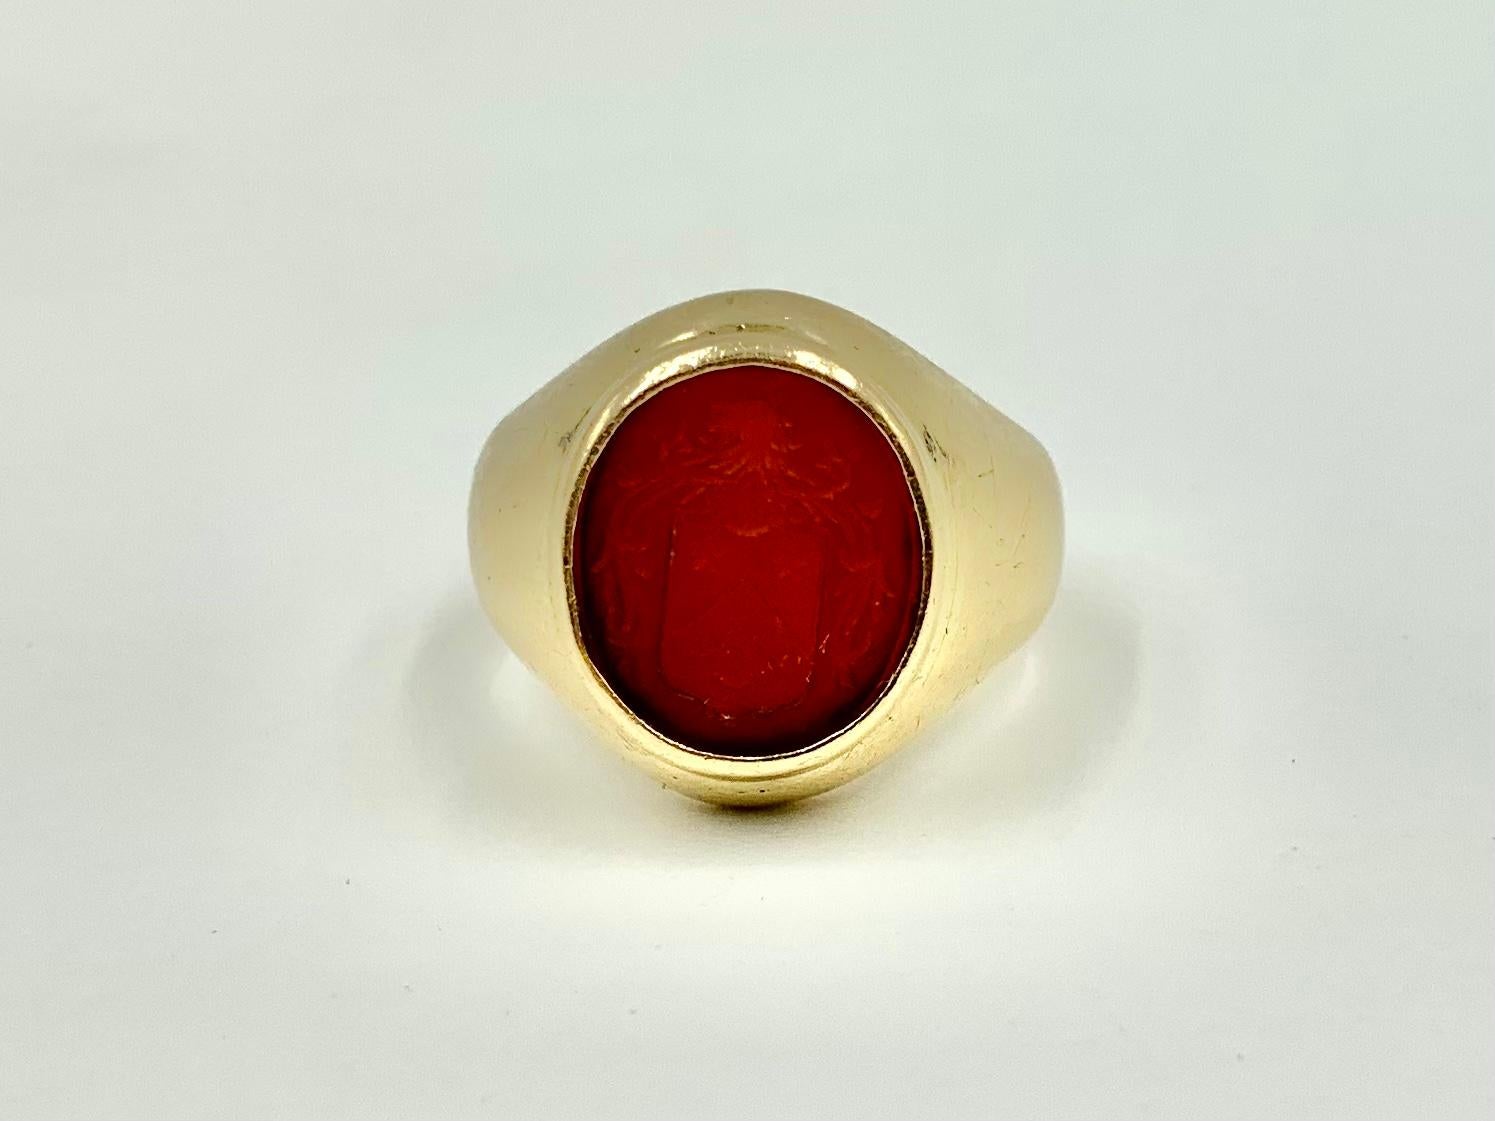 Tiffany & Co. Antique 14K Yellow Gold Carnelian Intaglio Crest Signet Ring For Sale 5